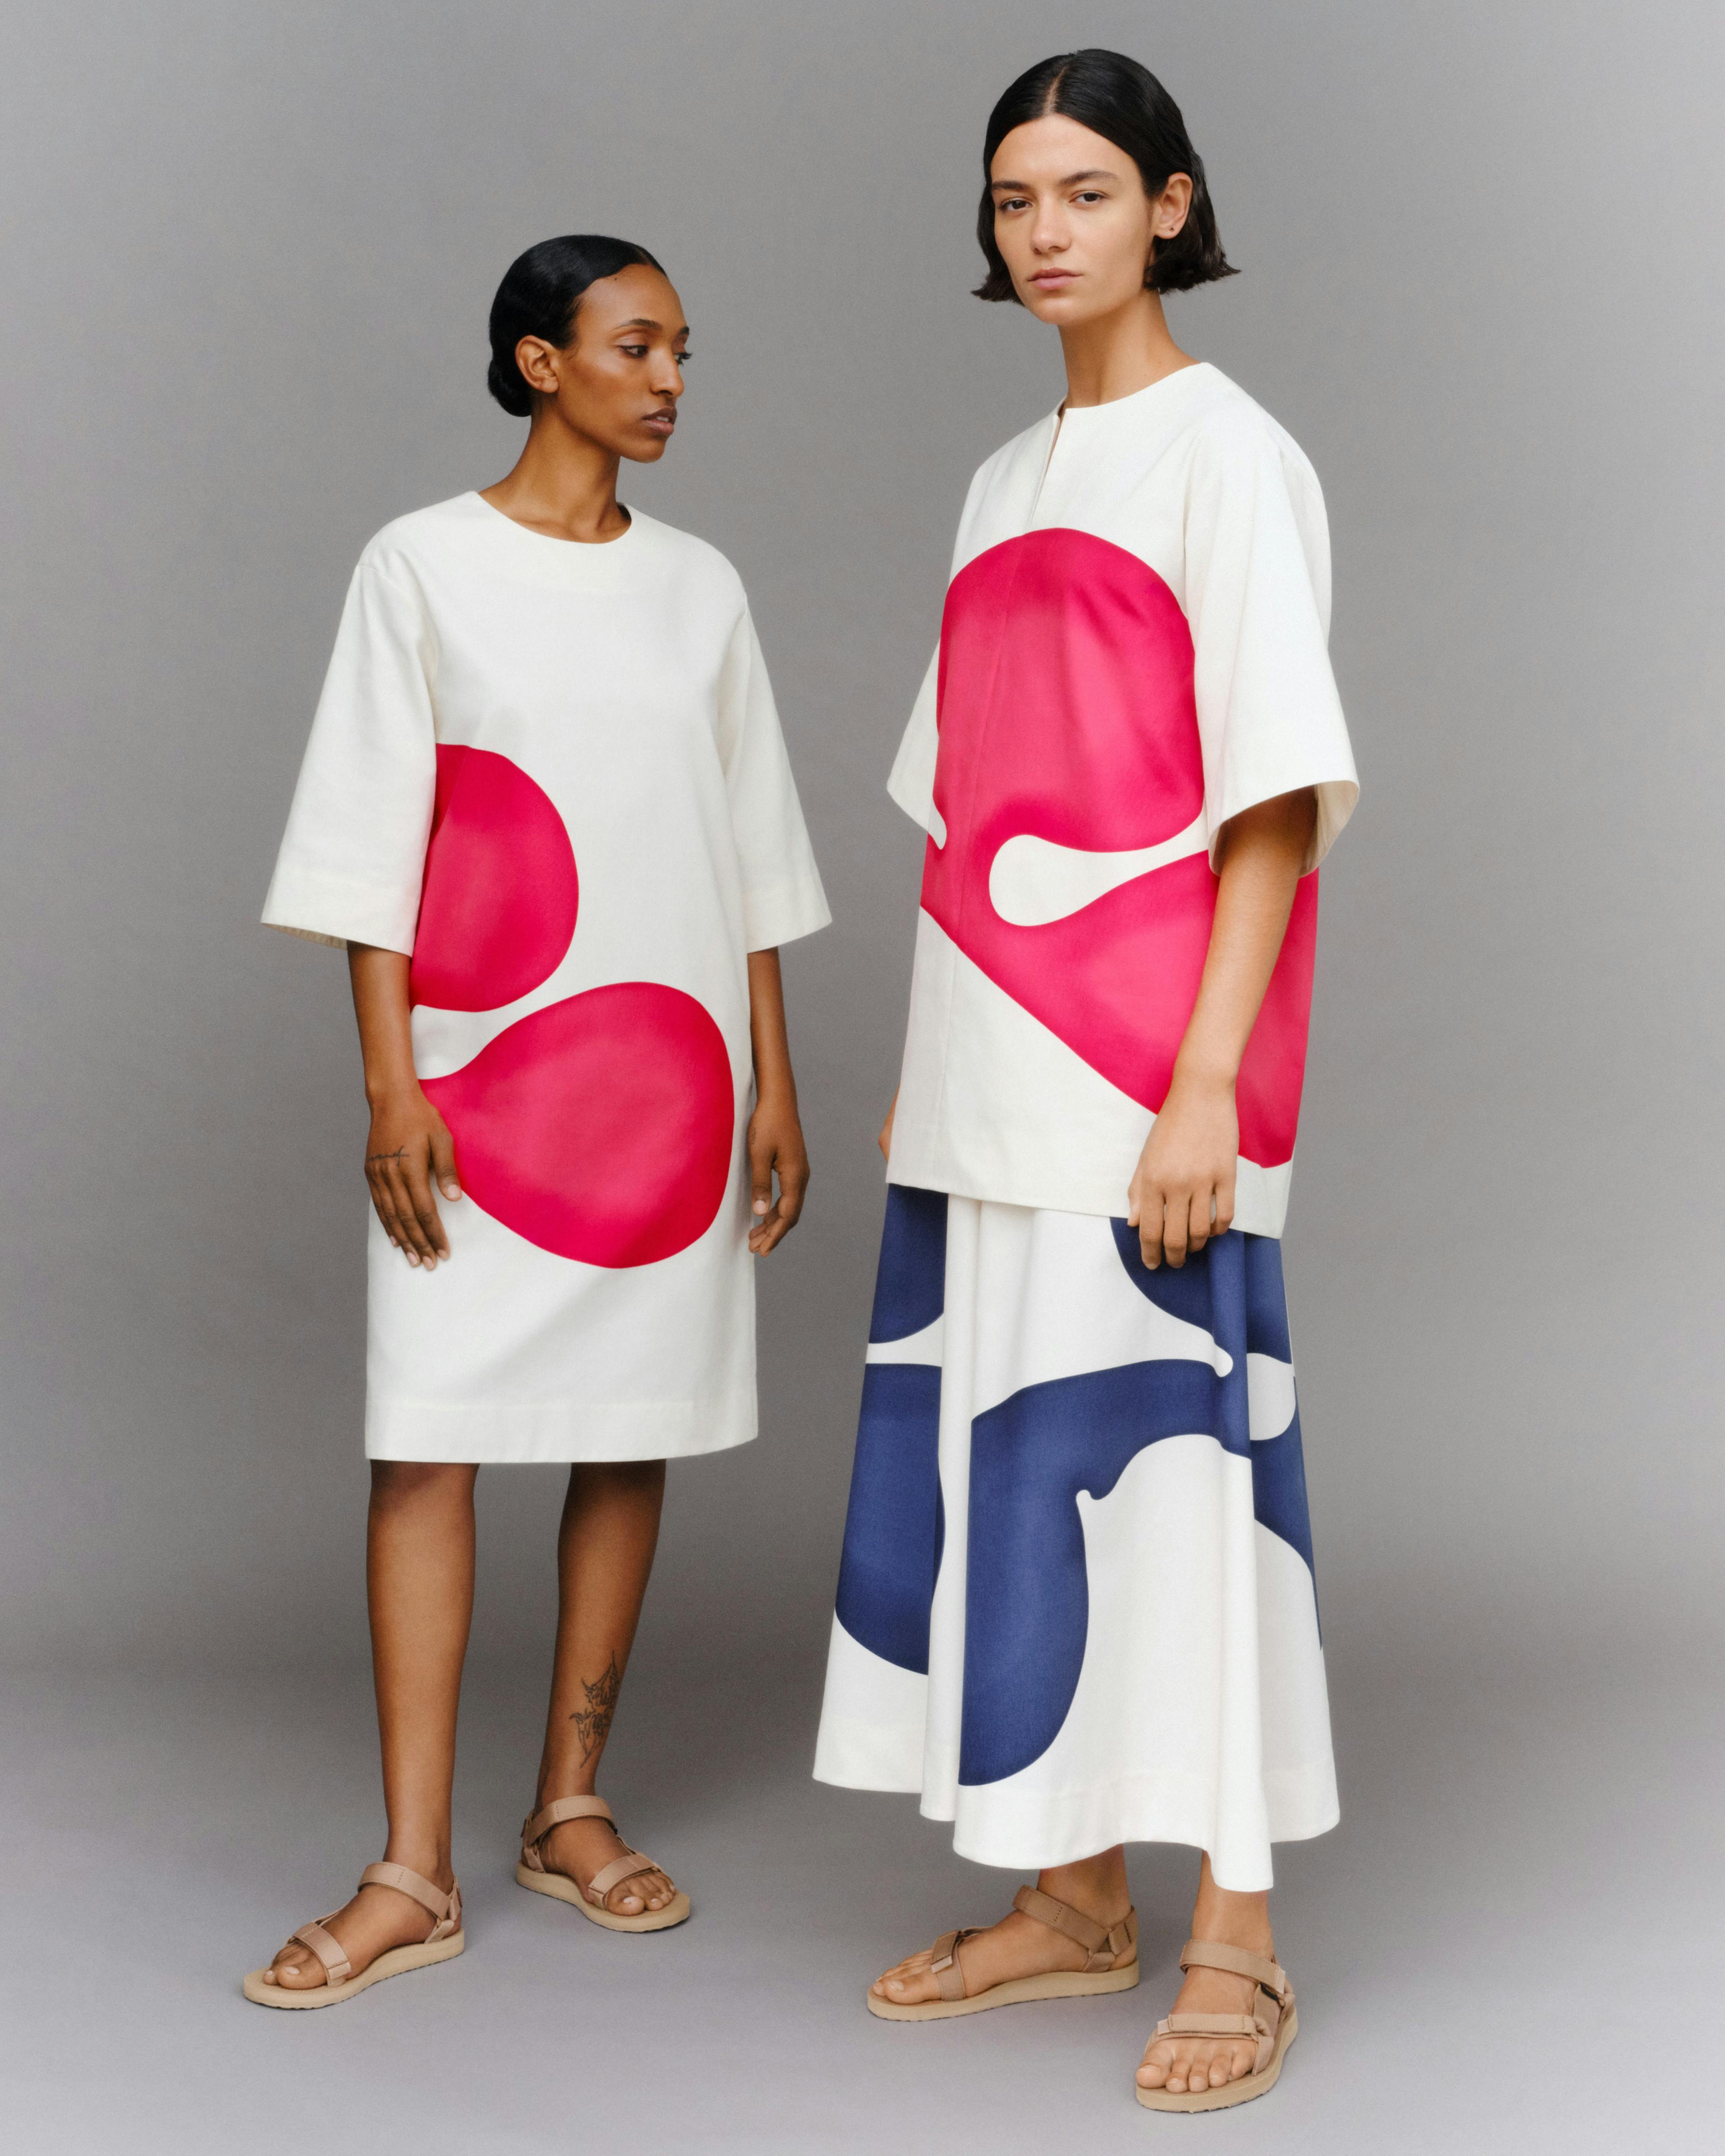 Two models pose in the Landon Metz and Marimekko capsule collection.